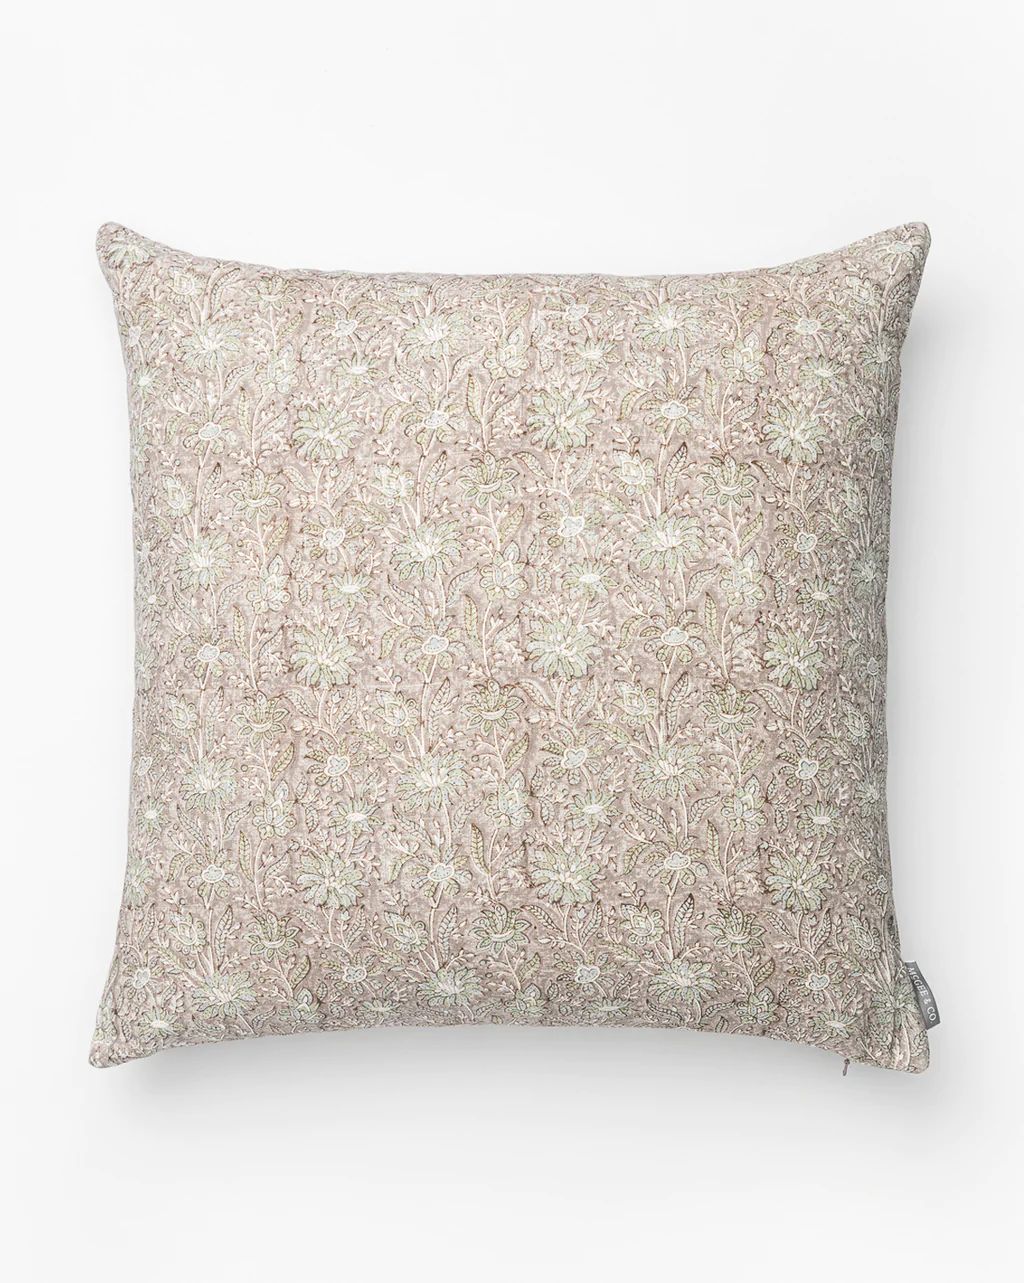 Opal Pillow Cover | McGee & Co.